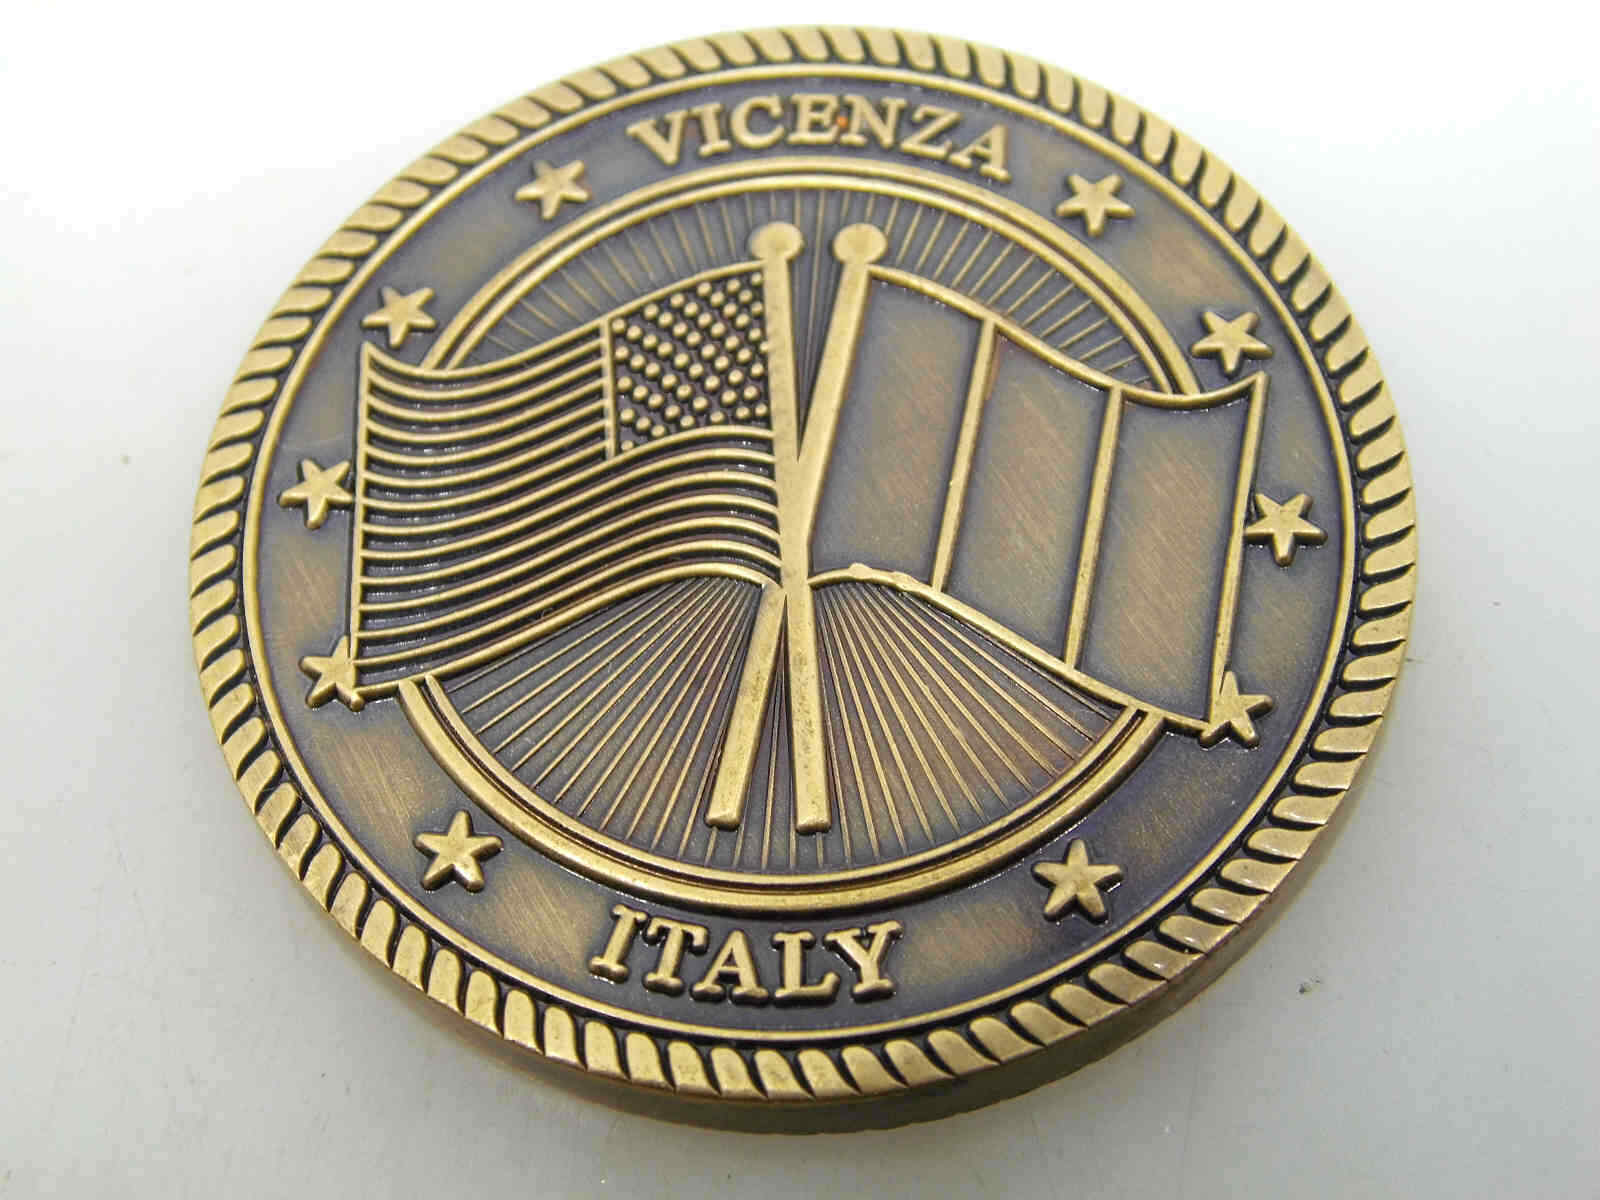 VICENZA ITALY CHALLENGE COIN